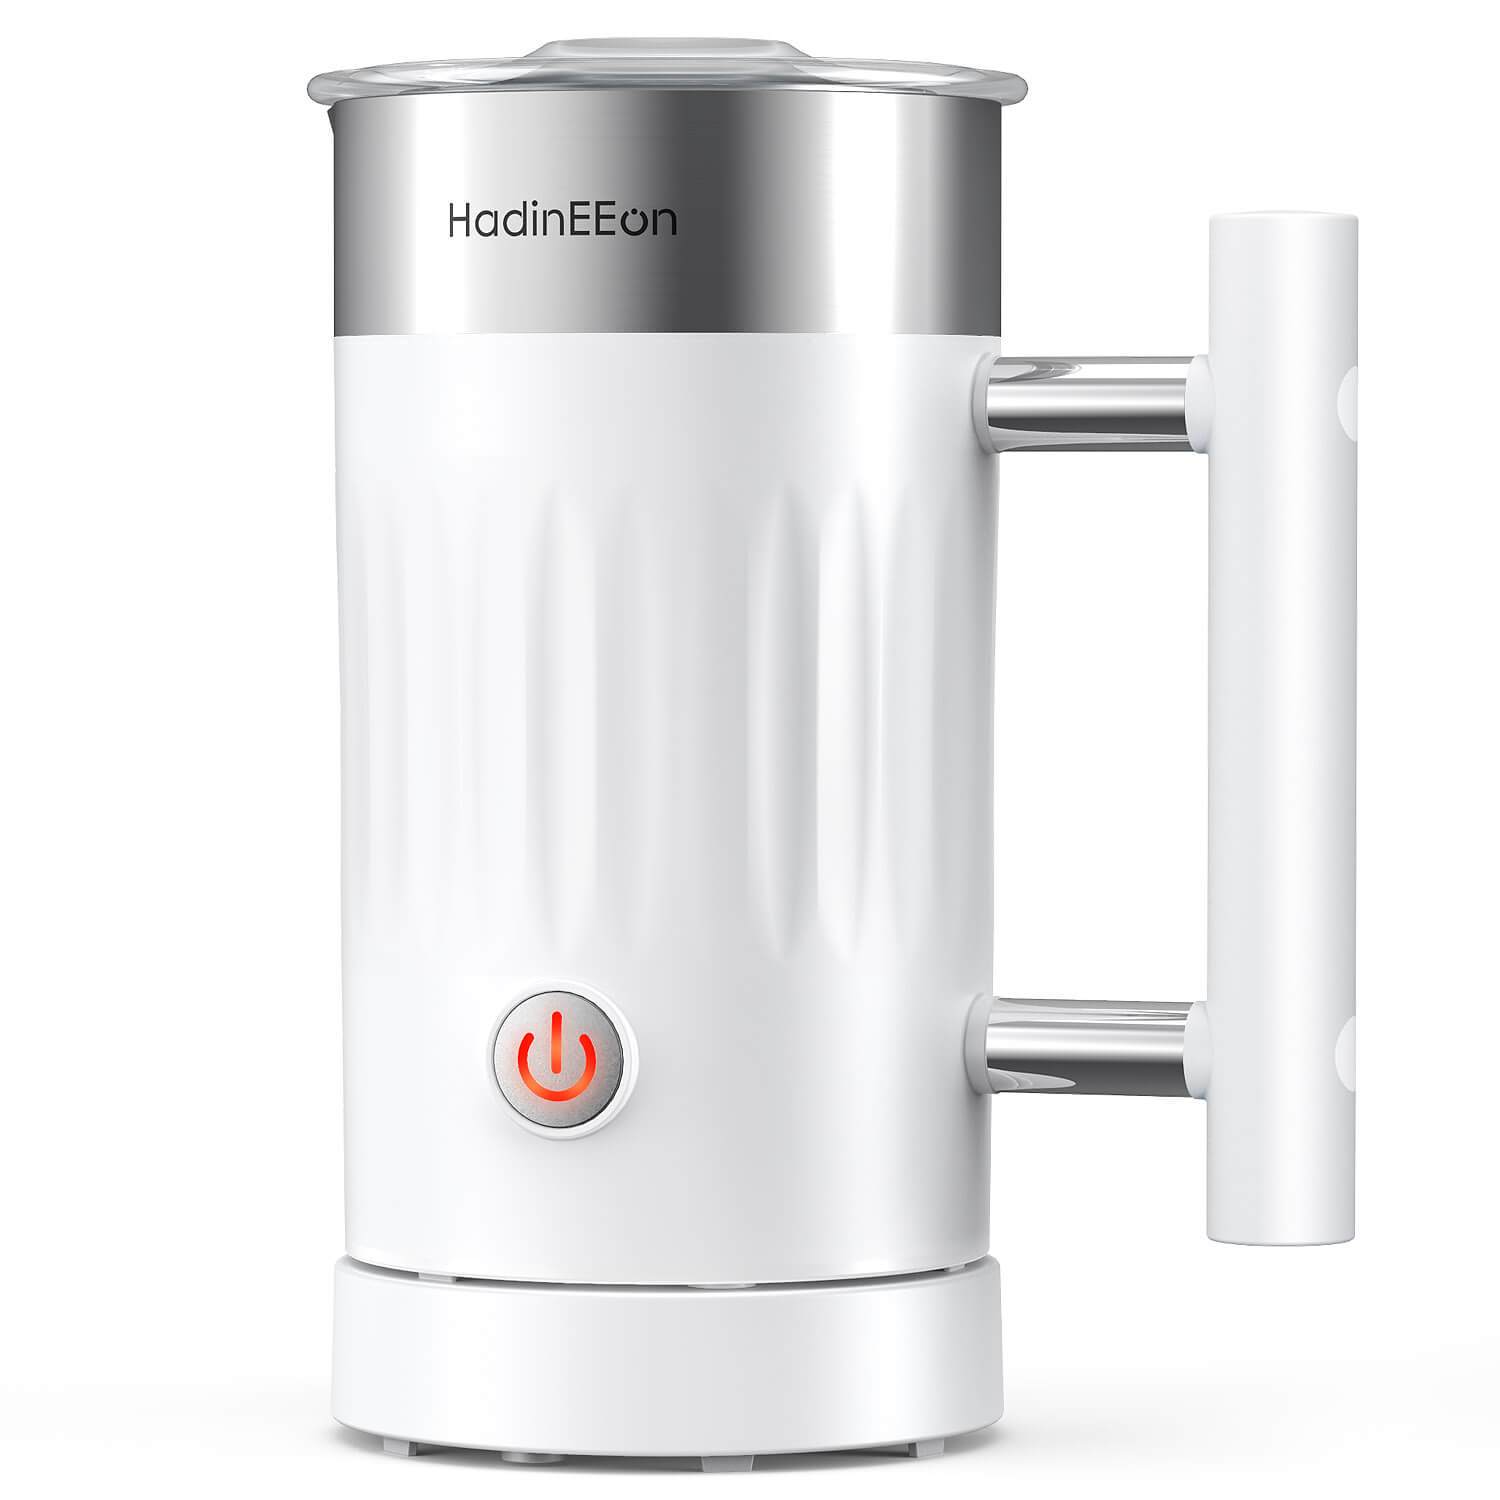 HadinEEon 5 in 1 Electric Magnetic Milk Frother for Coffee, Latte, Cap